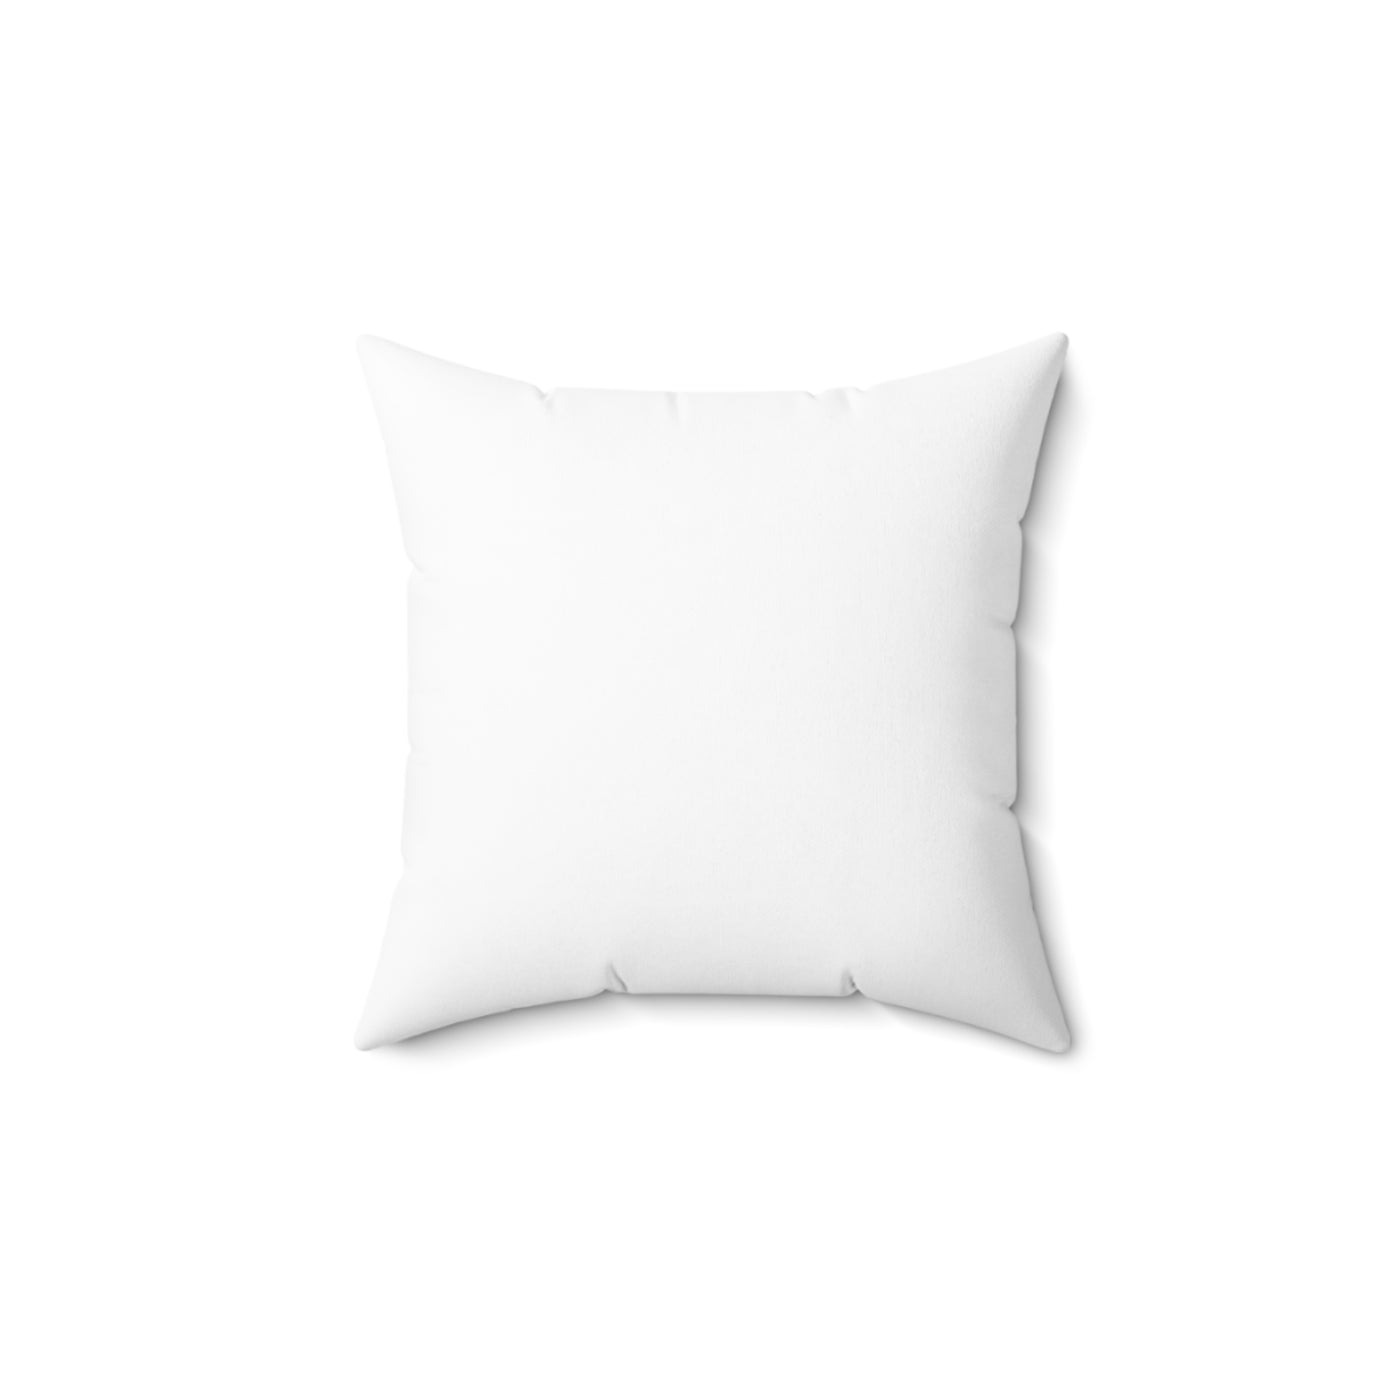 Mother's Day Pillow Cover | Mother's Day gift ideas | Love you mom Happy Mother's Day